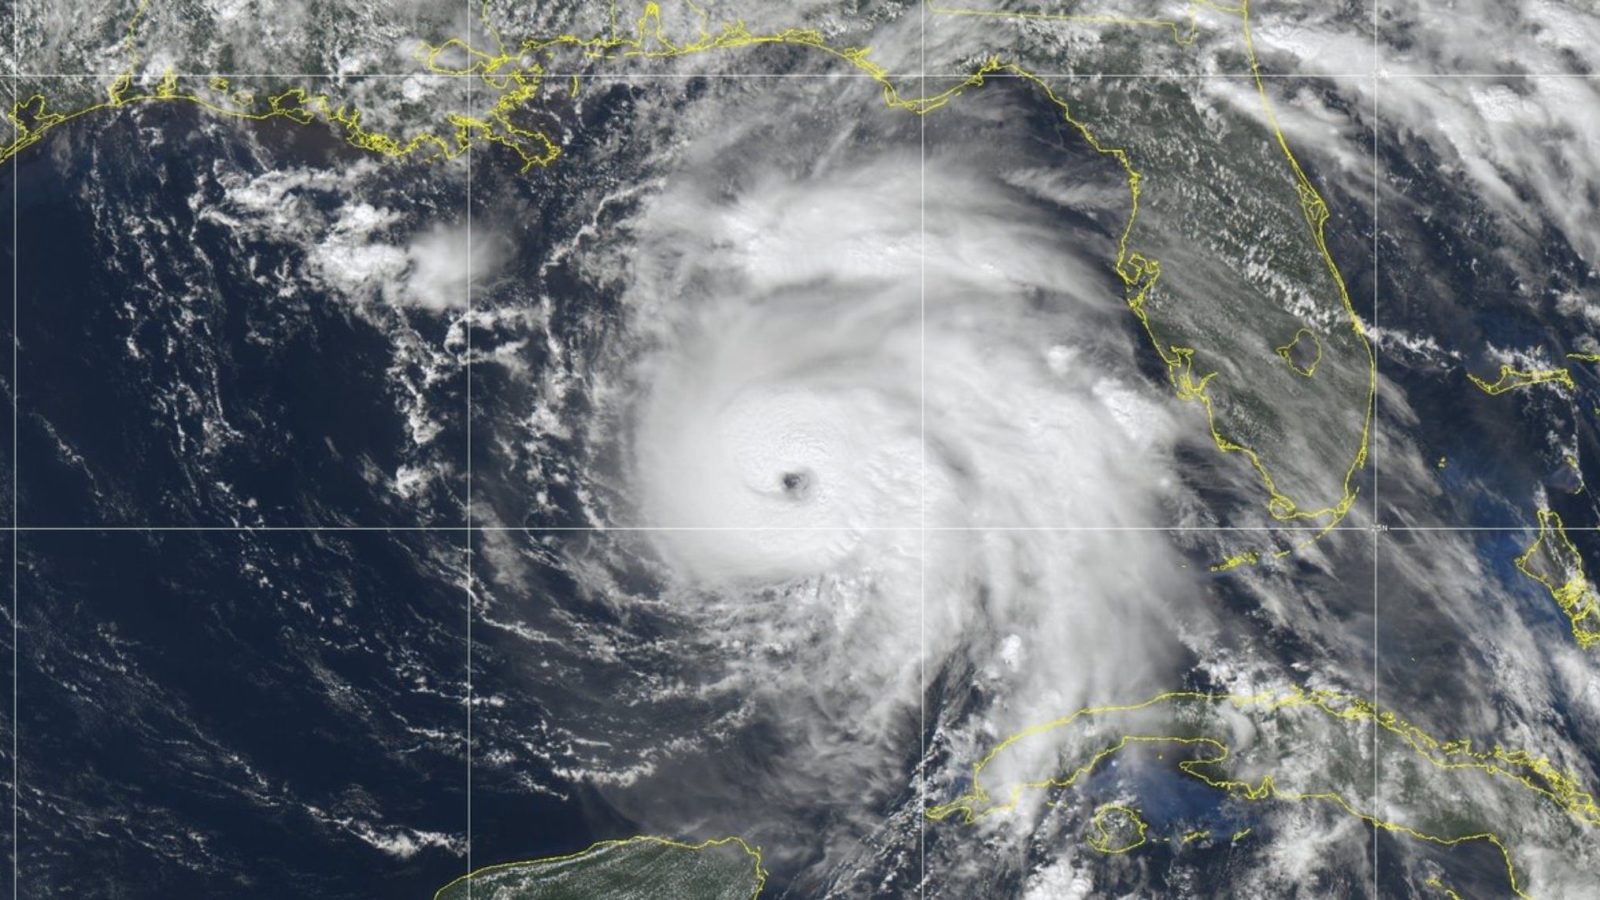 Hurricane Michael - FAA warns drone operators not to interfere with emergency response operations